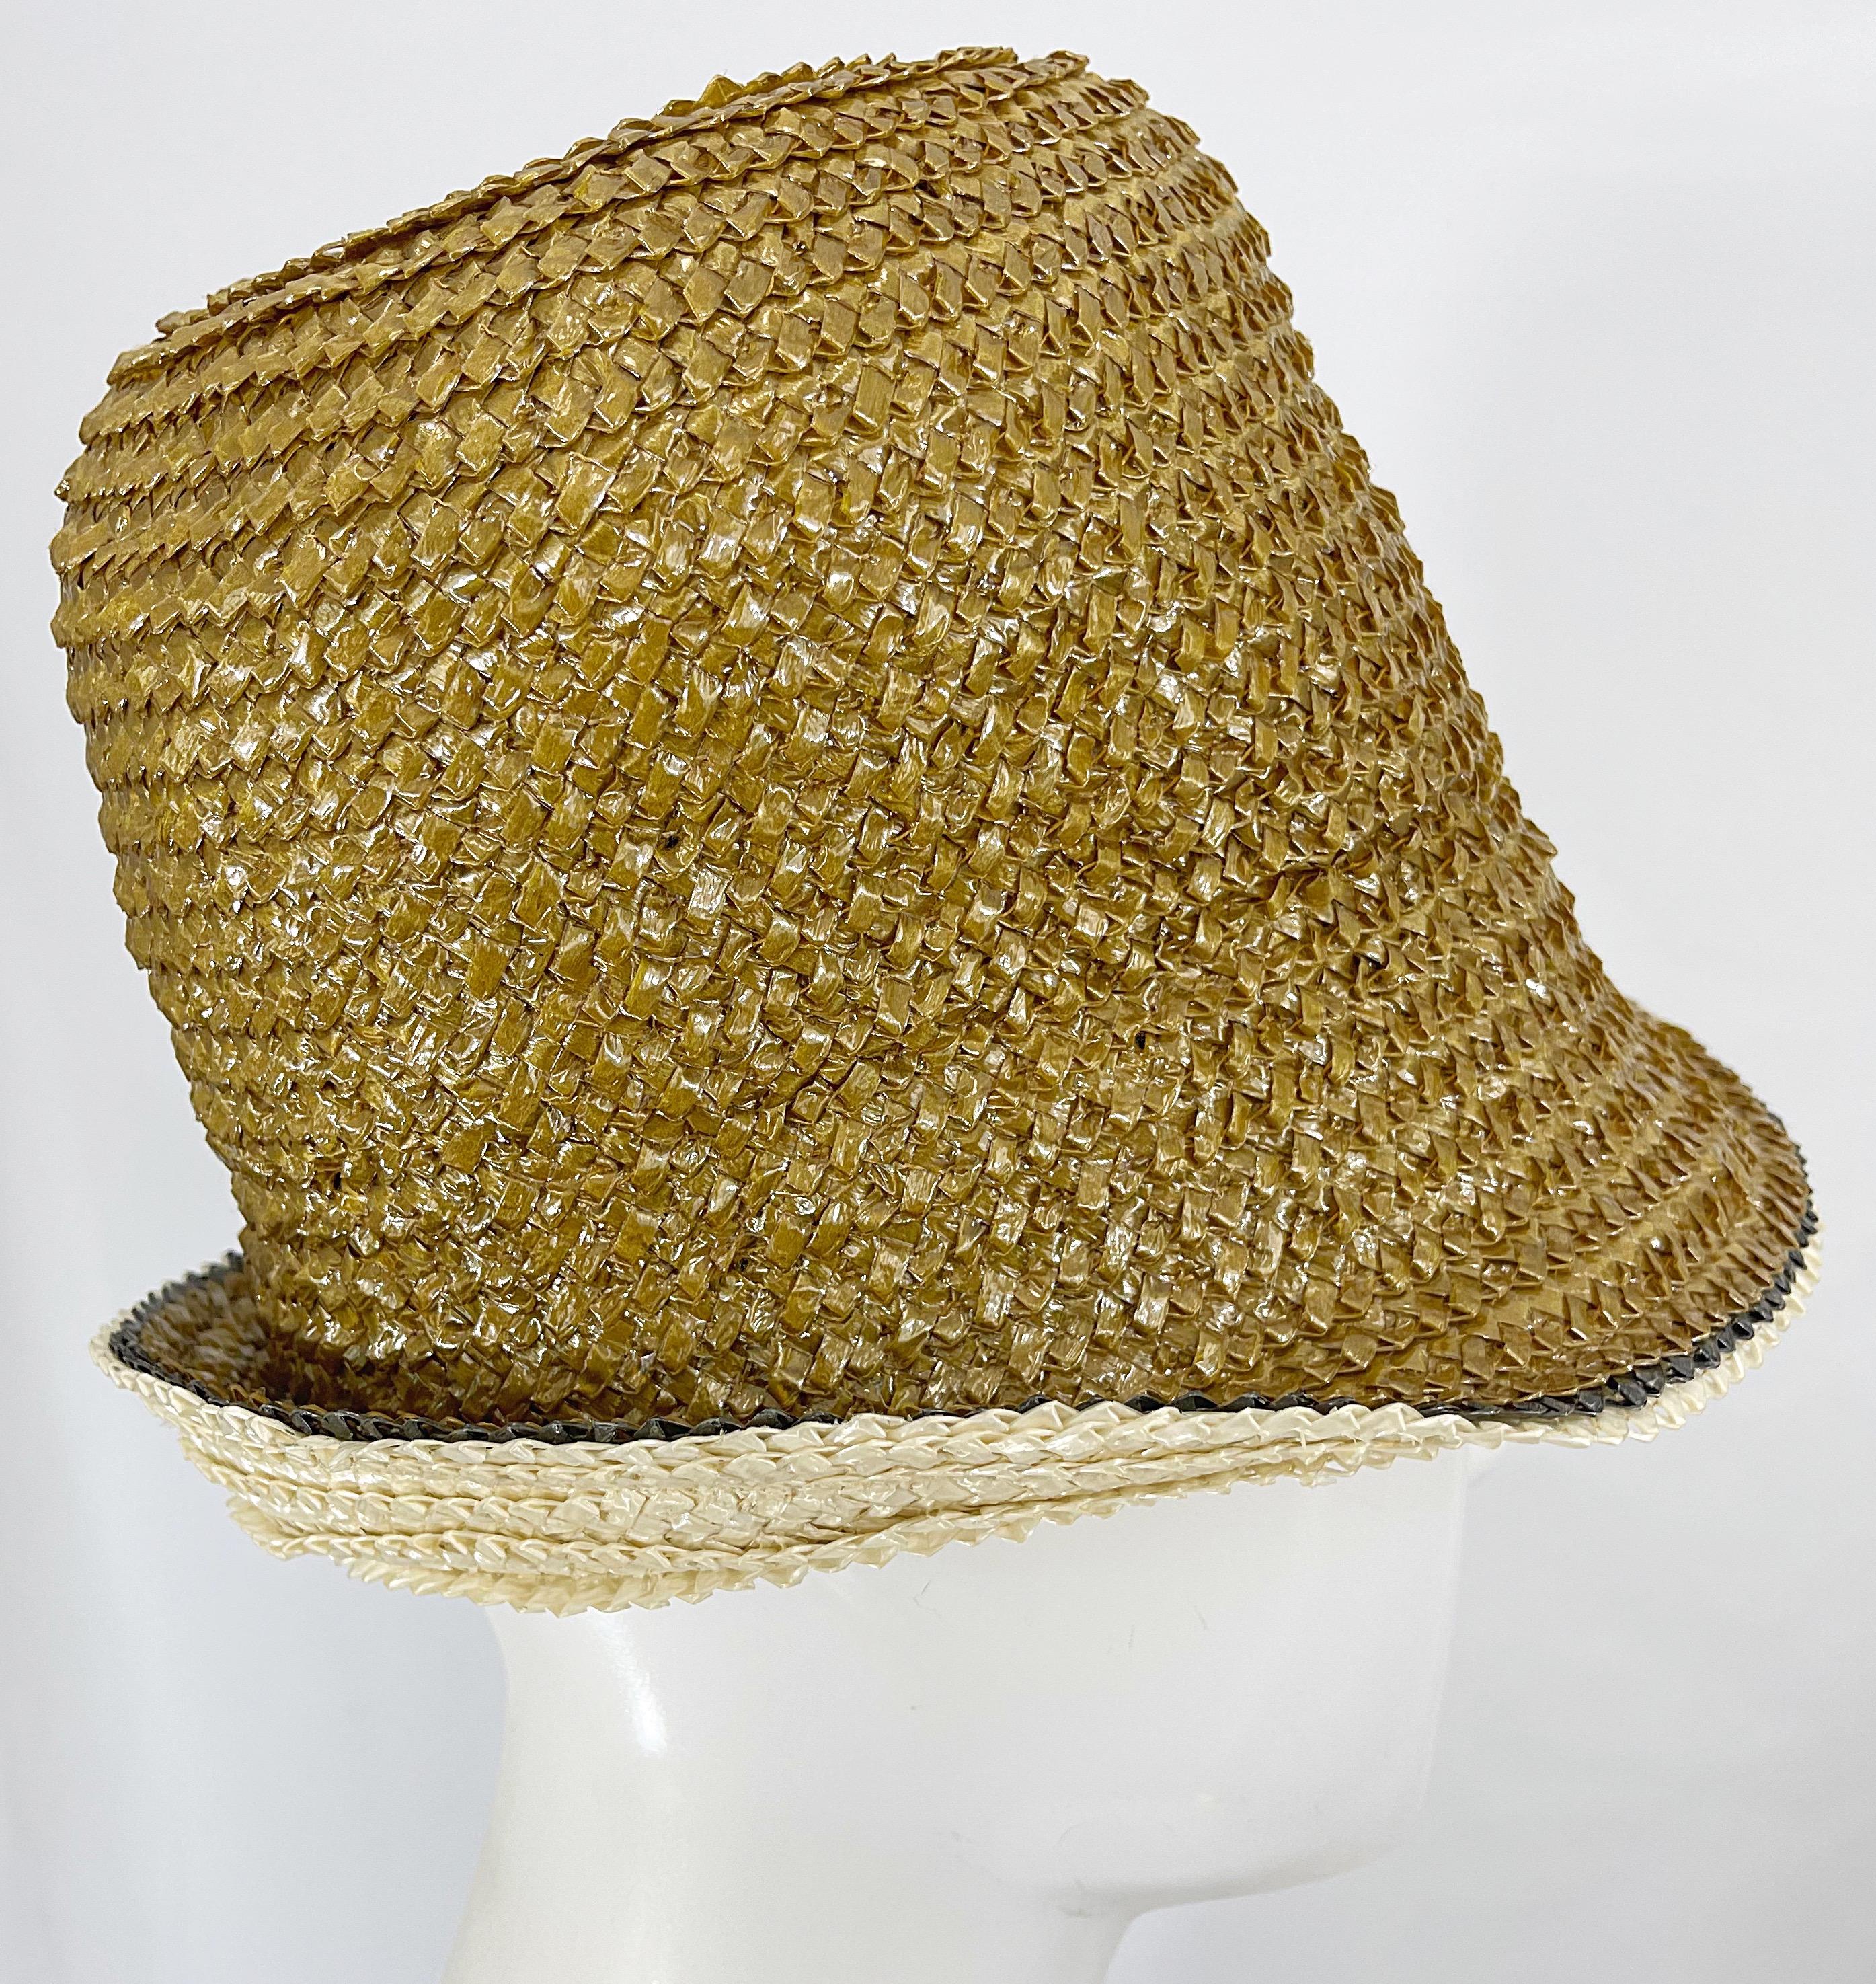 Chic 1960s YVES SAINT LAURENT gold raffia straw cloche hat ! Features a beautiful muted gold. Can be worn multiple ways, as pictured. Pair with jeans and a tank, a dress, etc. Great for anytime of year. 
In great condition
Made in France
Inner